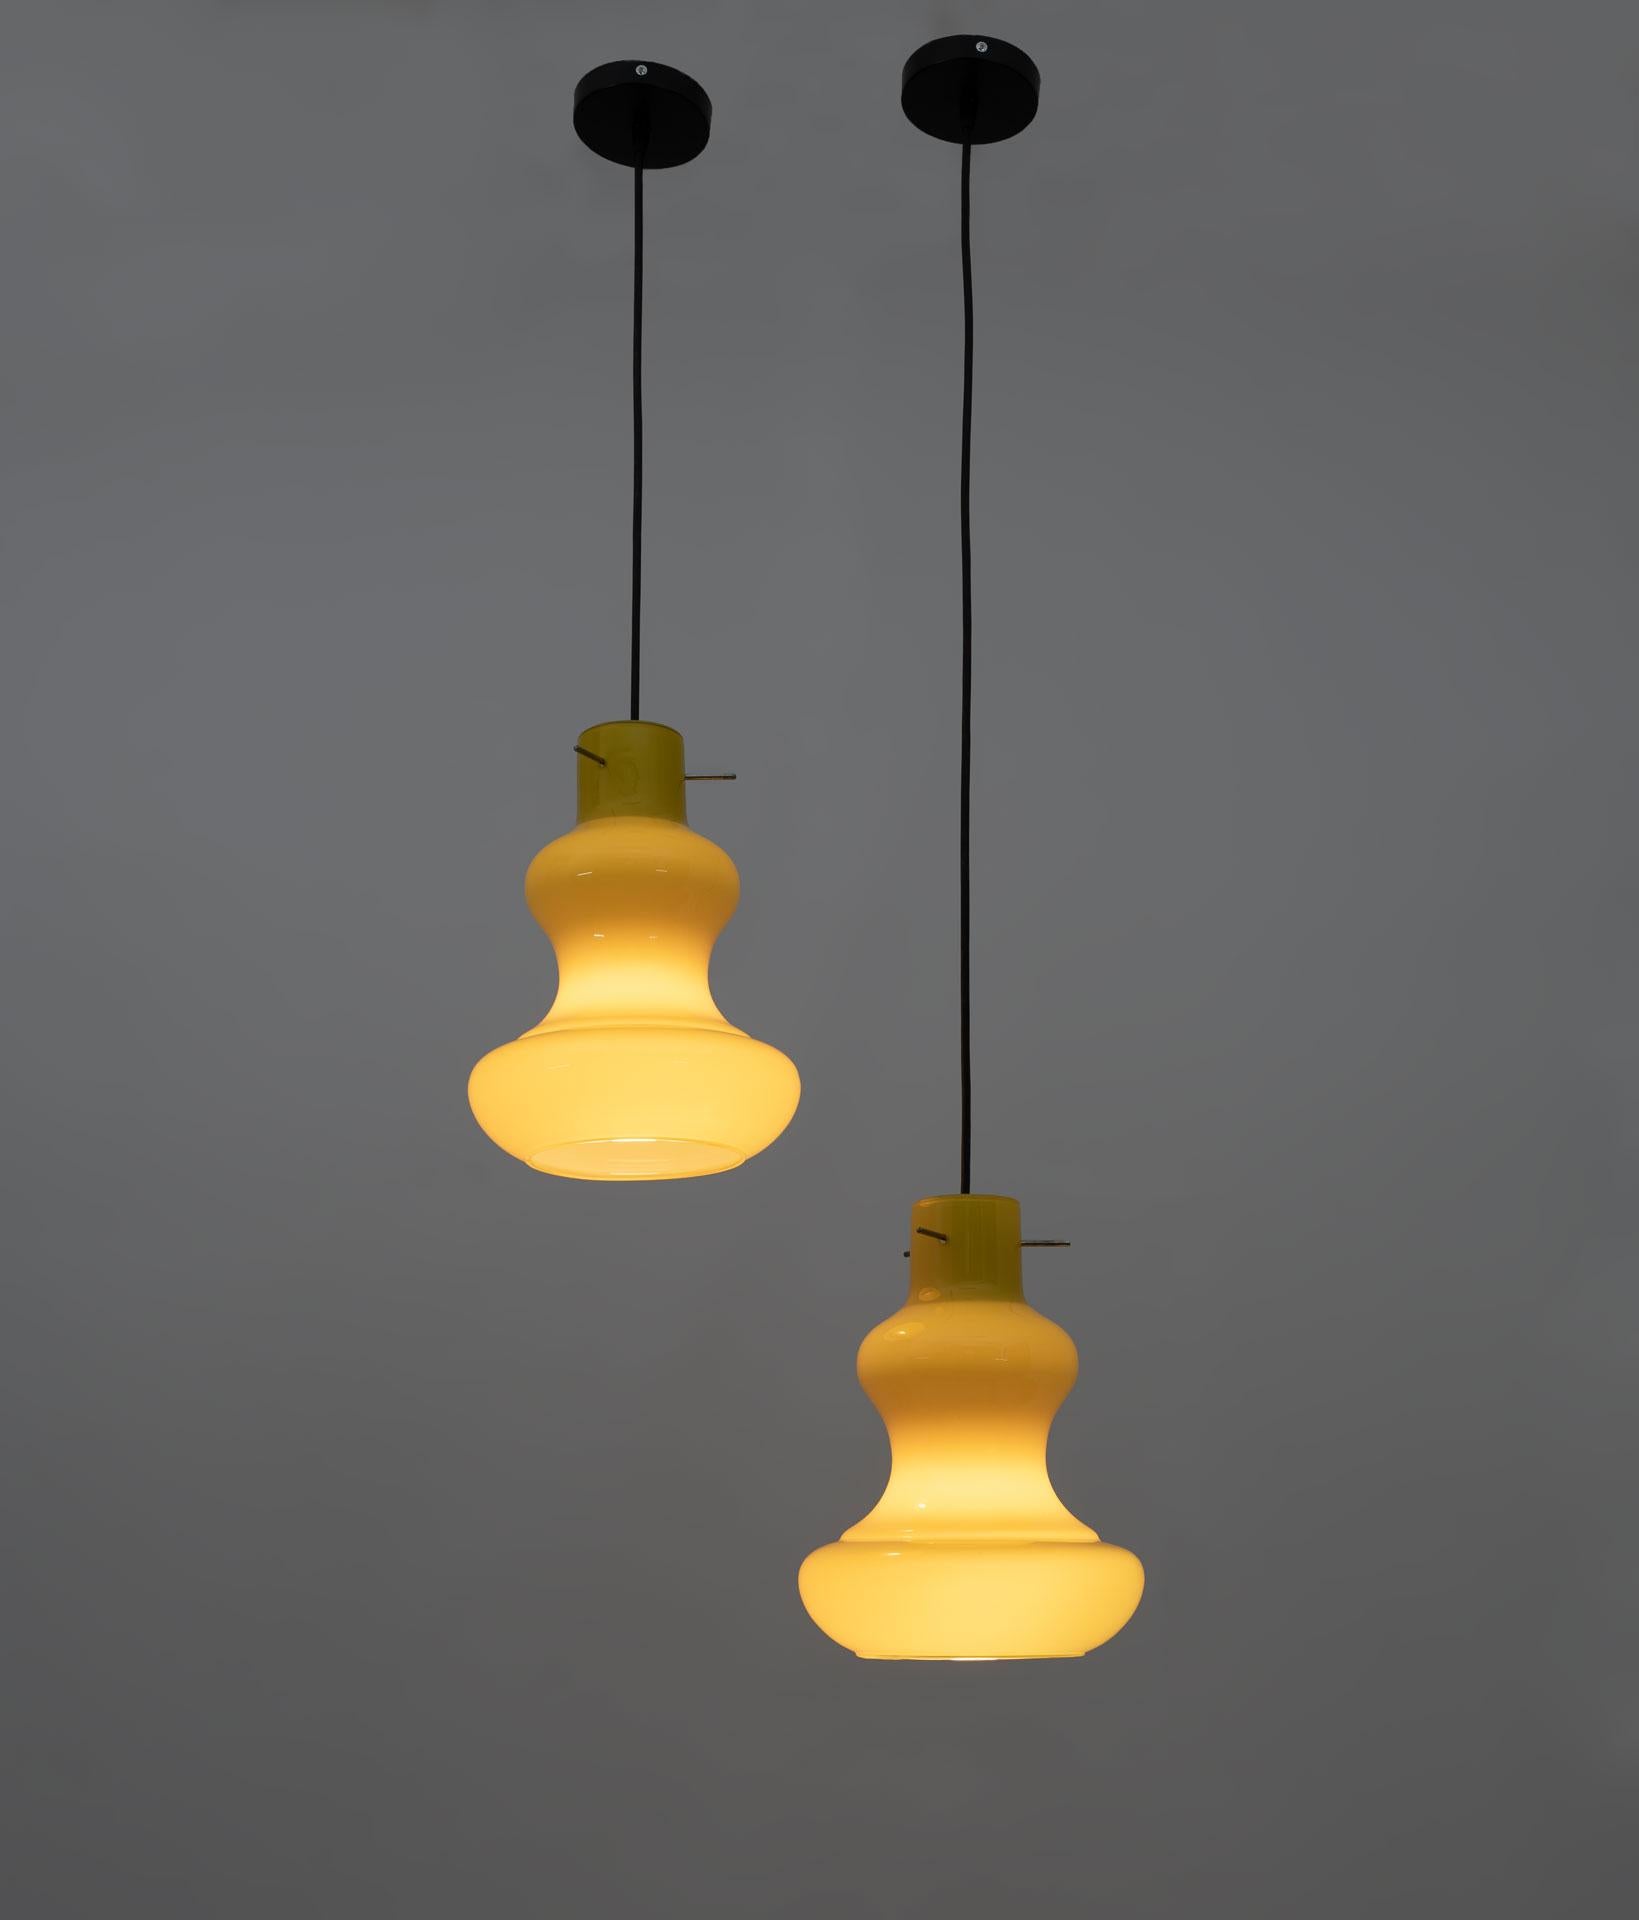 Pair of pendant lamps designed by Massimo Vignelli for the Vistosi glassworks in the 1960s, made of cased Murano glass. It has a beautiful bright yellow color and produces different shades of yellow when lit.
The indicated size refers to the glass